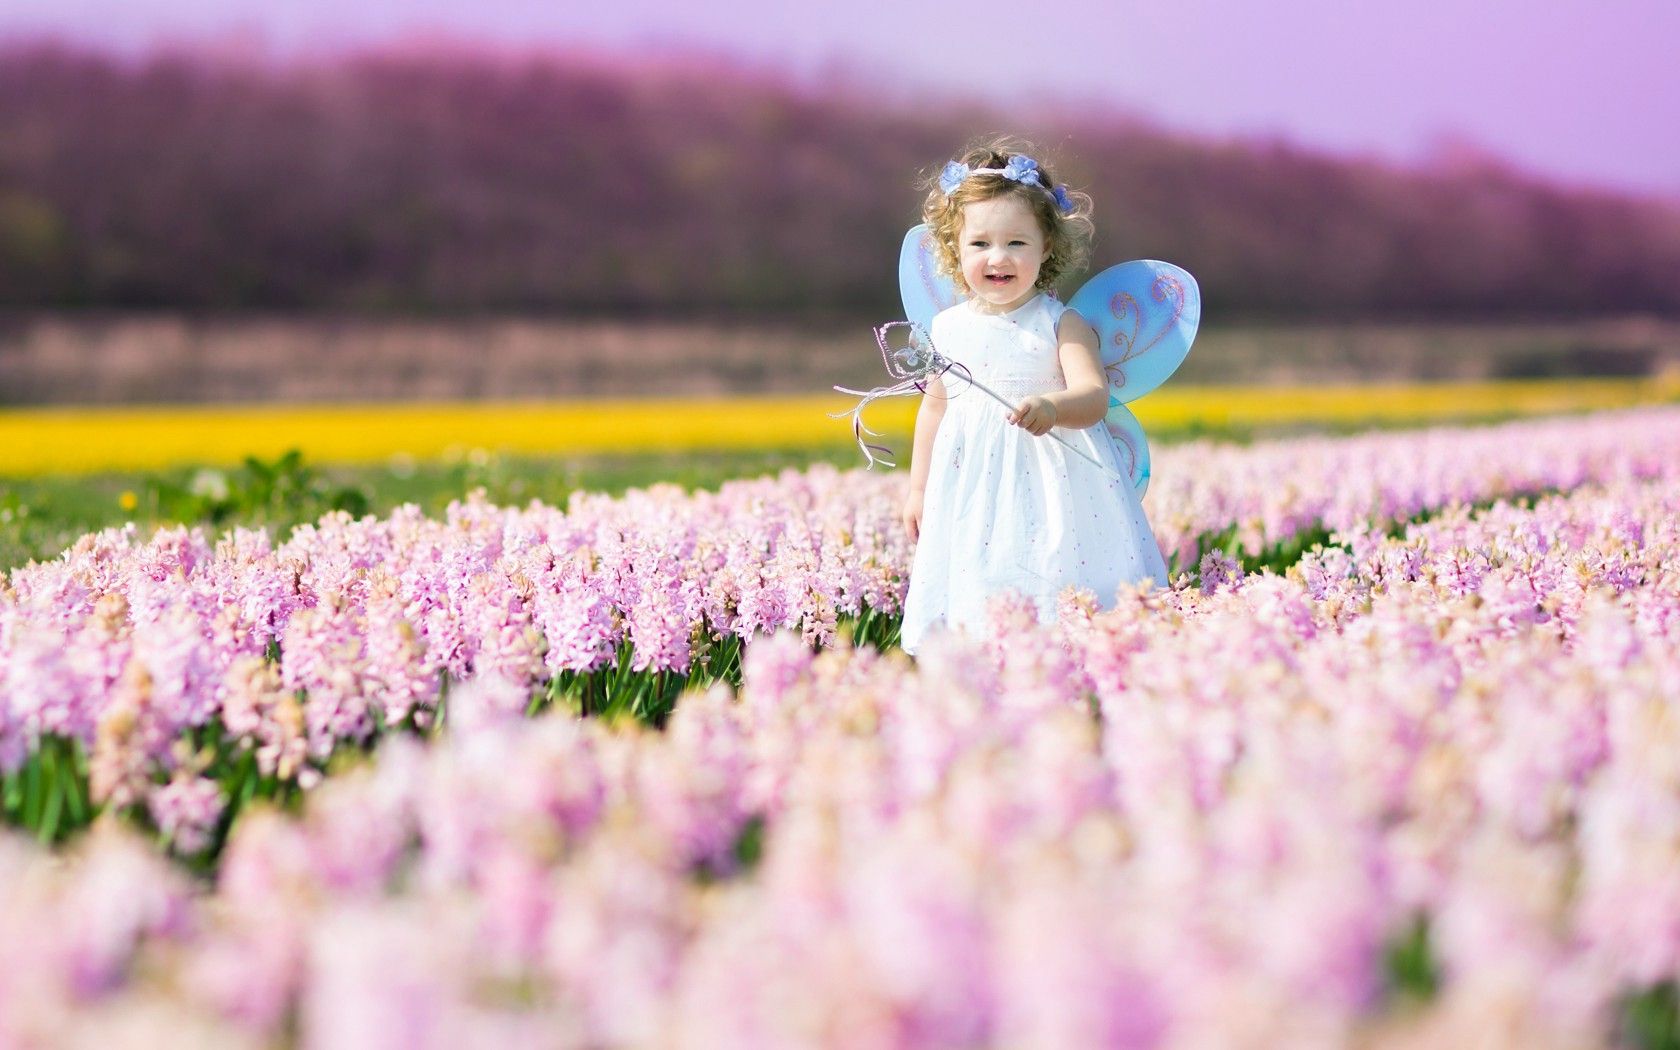 Free download Cute Baby in Spring Flower Field Image New HD